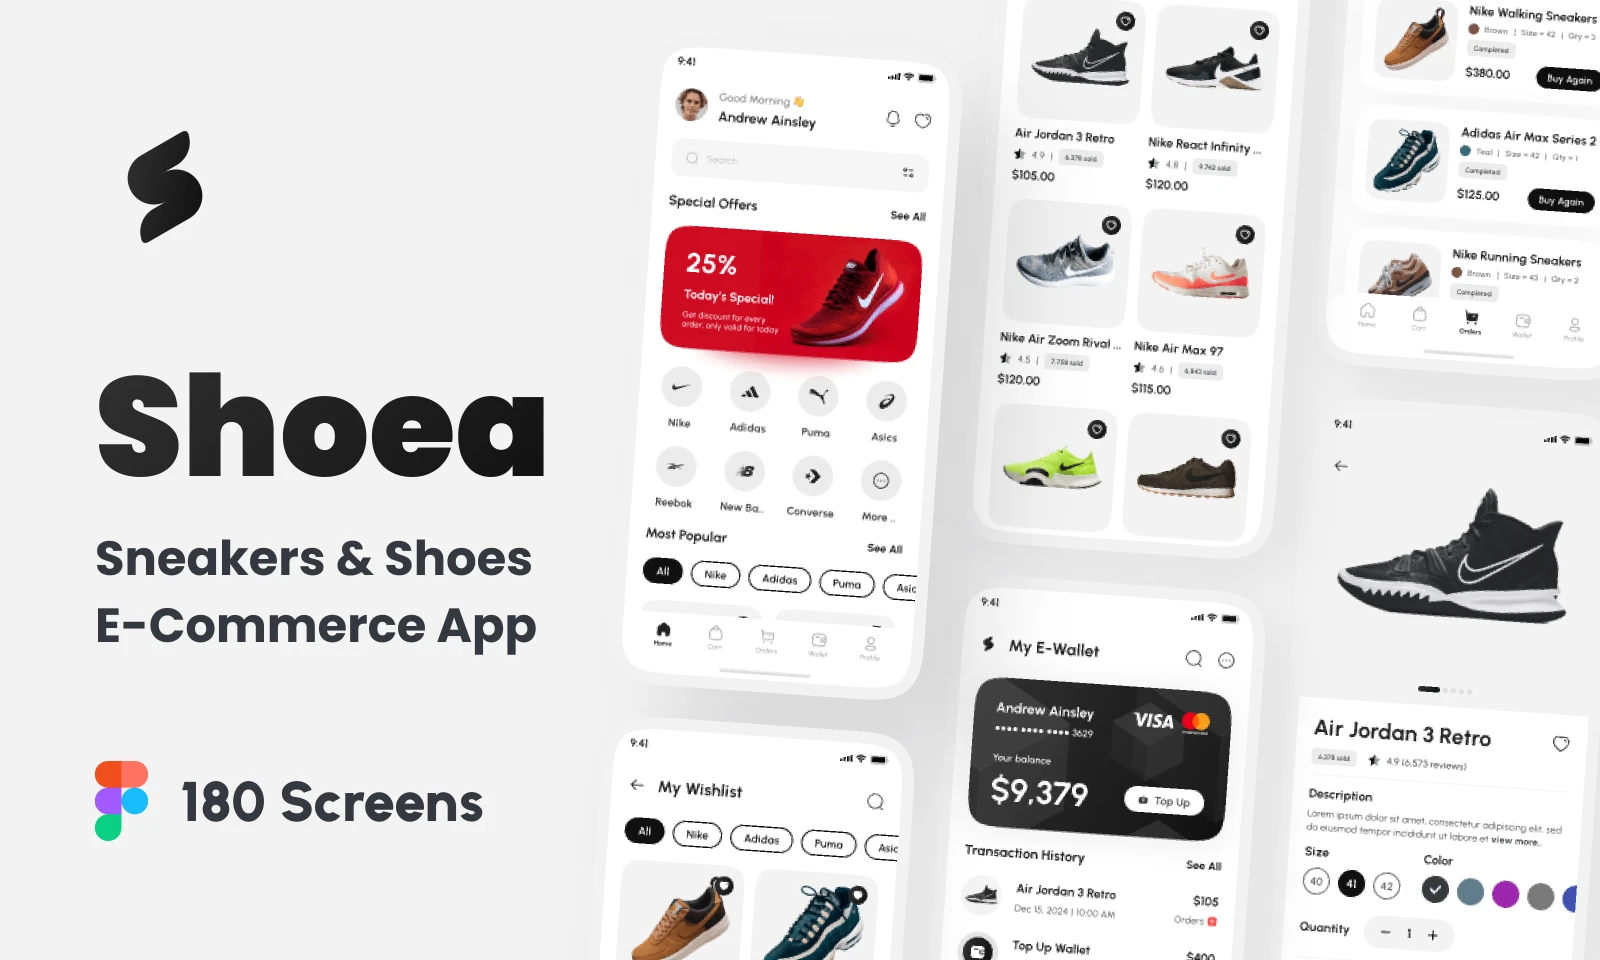 Shoea - Sneakers & Shoes E-Commerce App UI Kit for Figma and Adobe XD